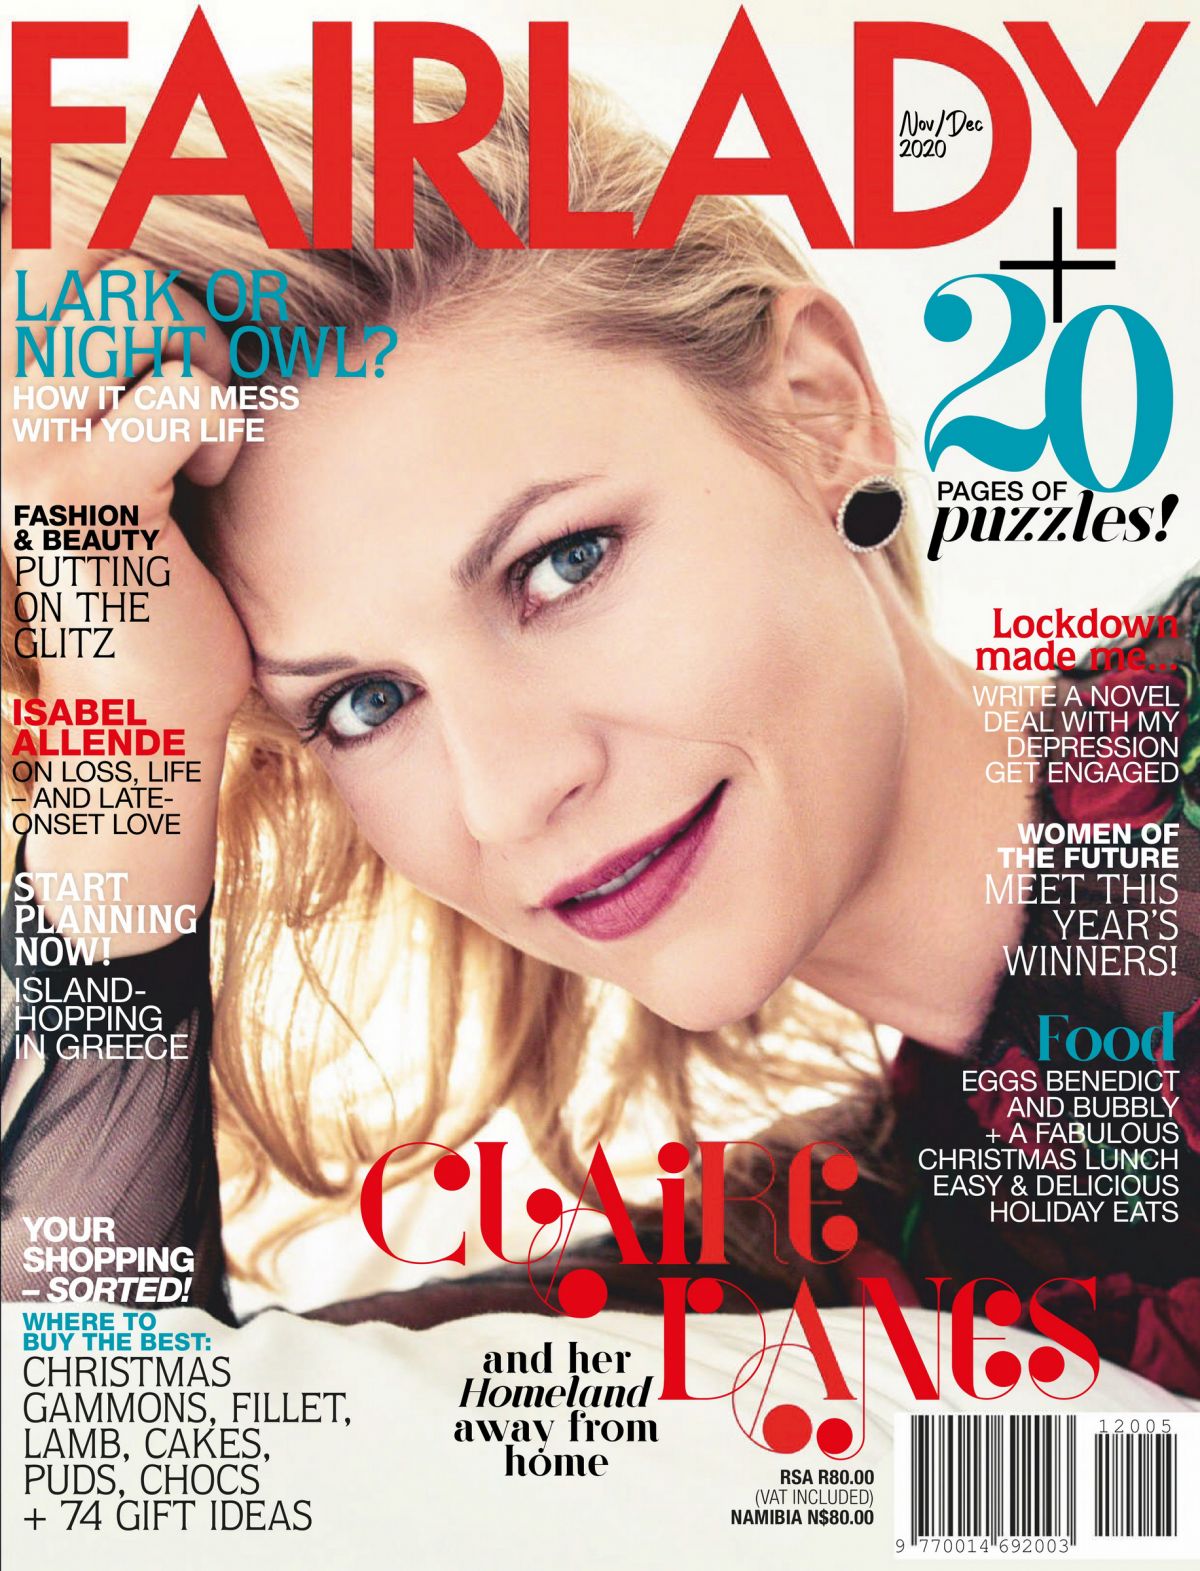 Claire Danes Photoshoot for Fairlady Magazine, November 2020 Issue 3